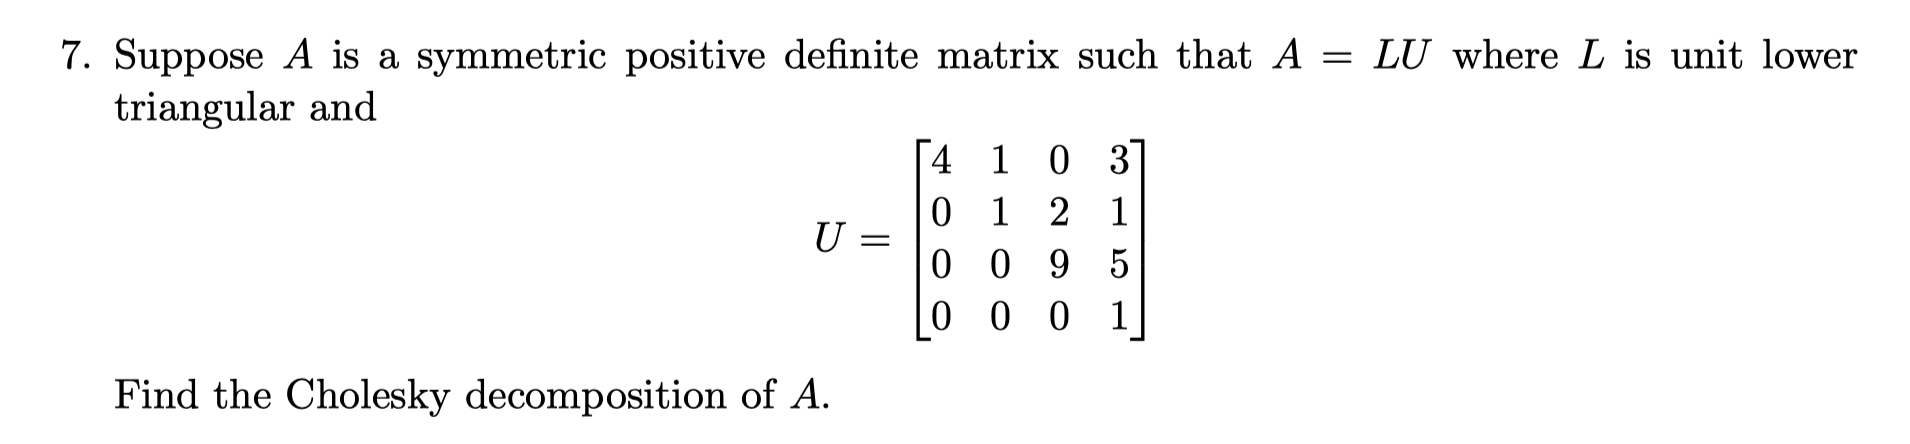 7. Suppose A is a symmetric positive definite matrix such that A = LU where L is unit lower
triangular and
4 1 0 3
0 1 2 1
0 0 9 5
0 0 0
U =
Find the Cholesky decomposition of A.
